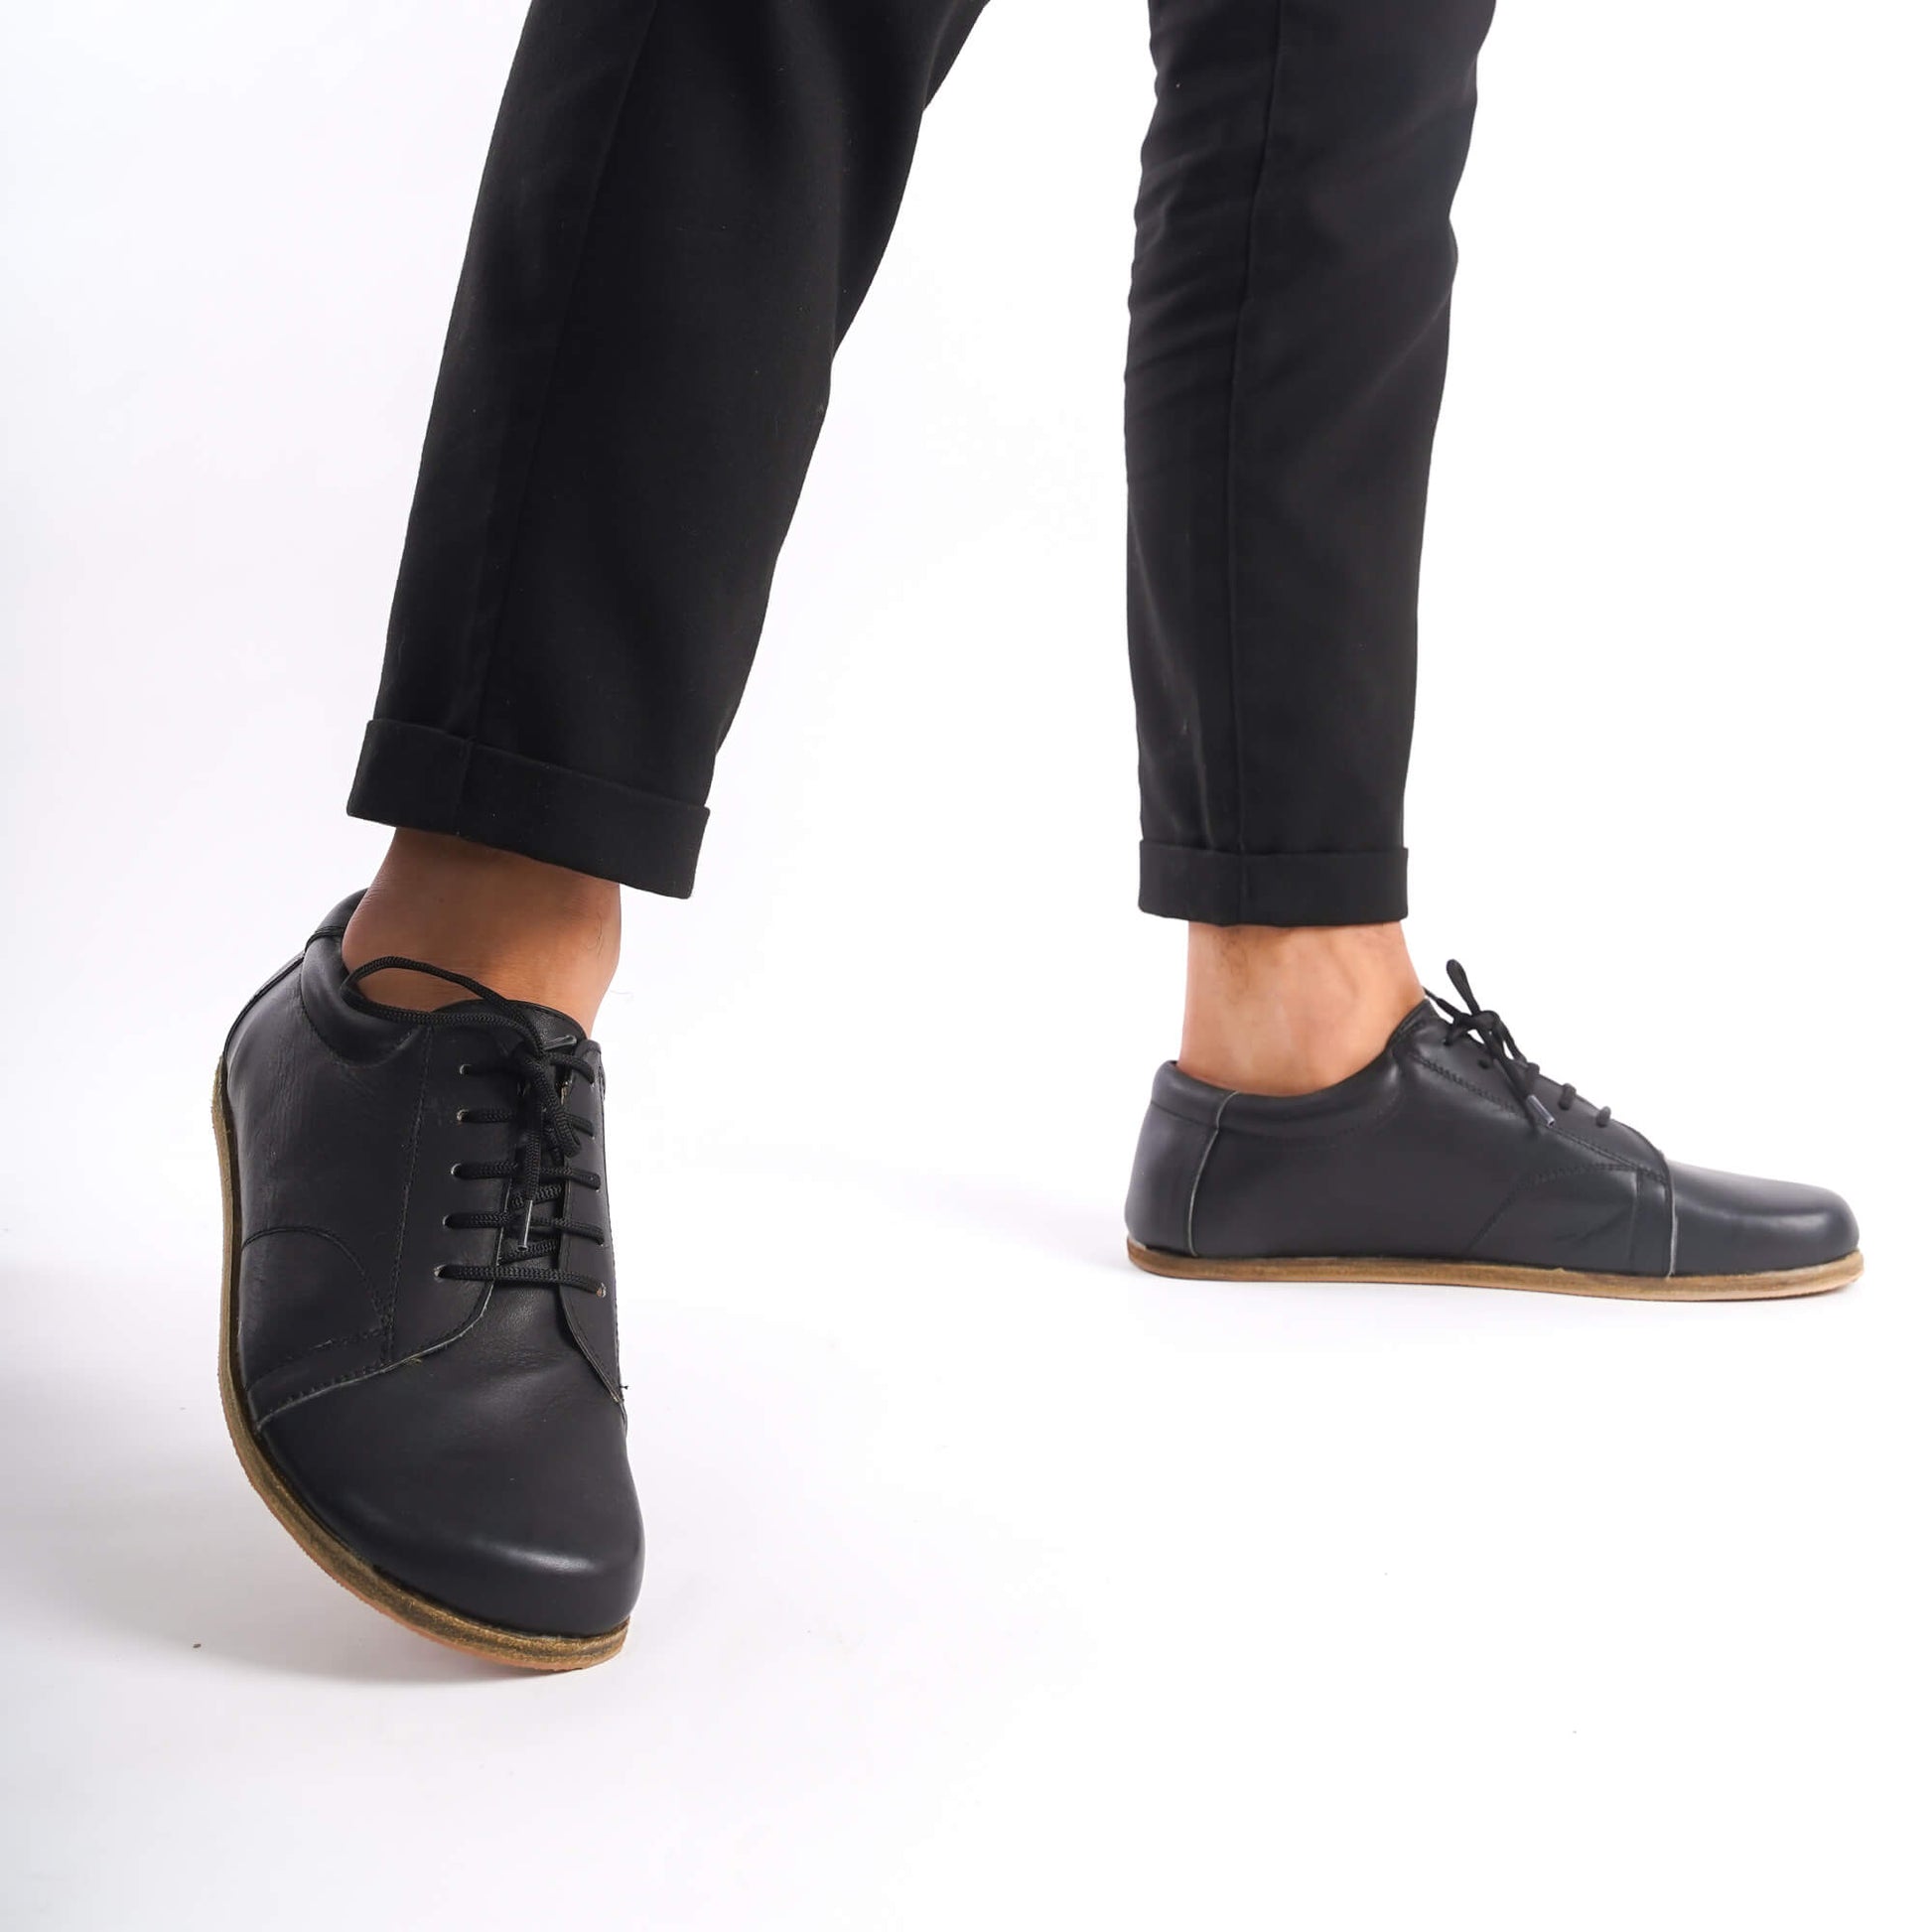 Black Lydia Leather Barefoot Men's Sneakers with lace-up closure, displayed with a focus on the craftsmanship and genuine leather material.